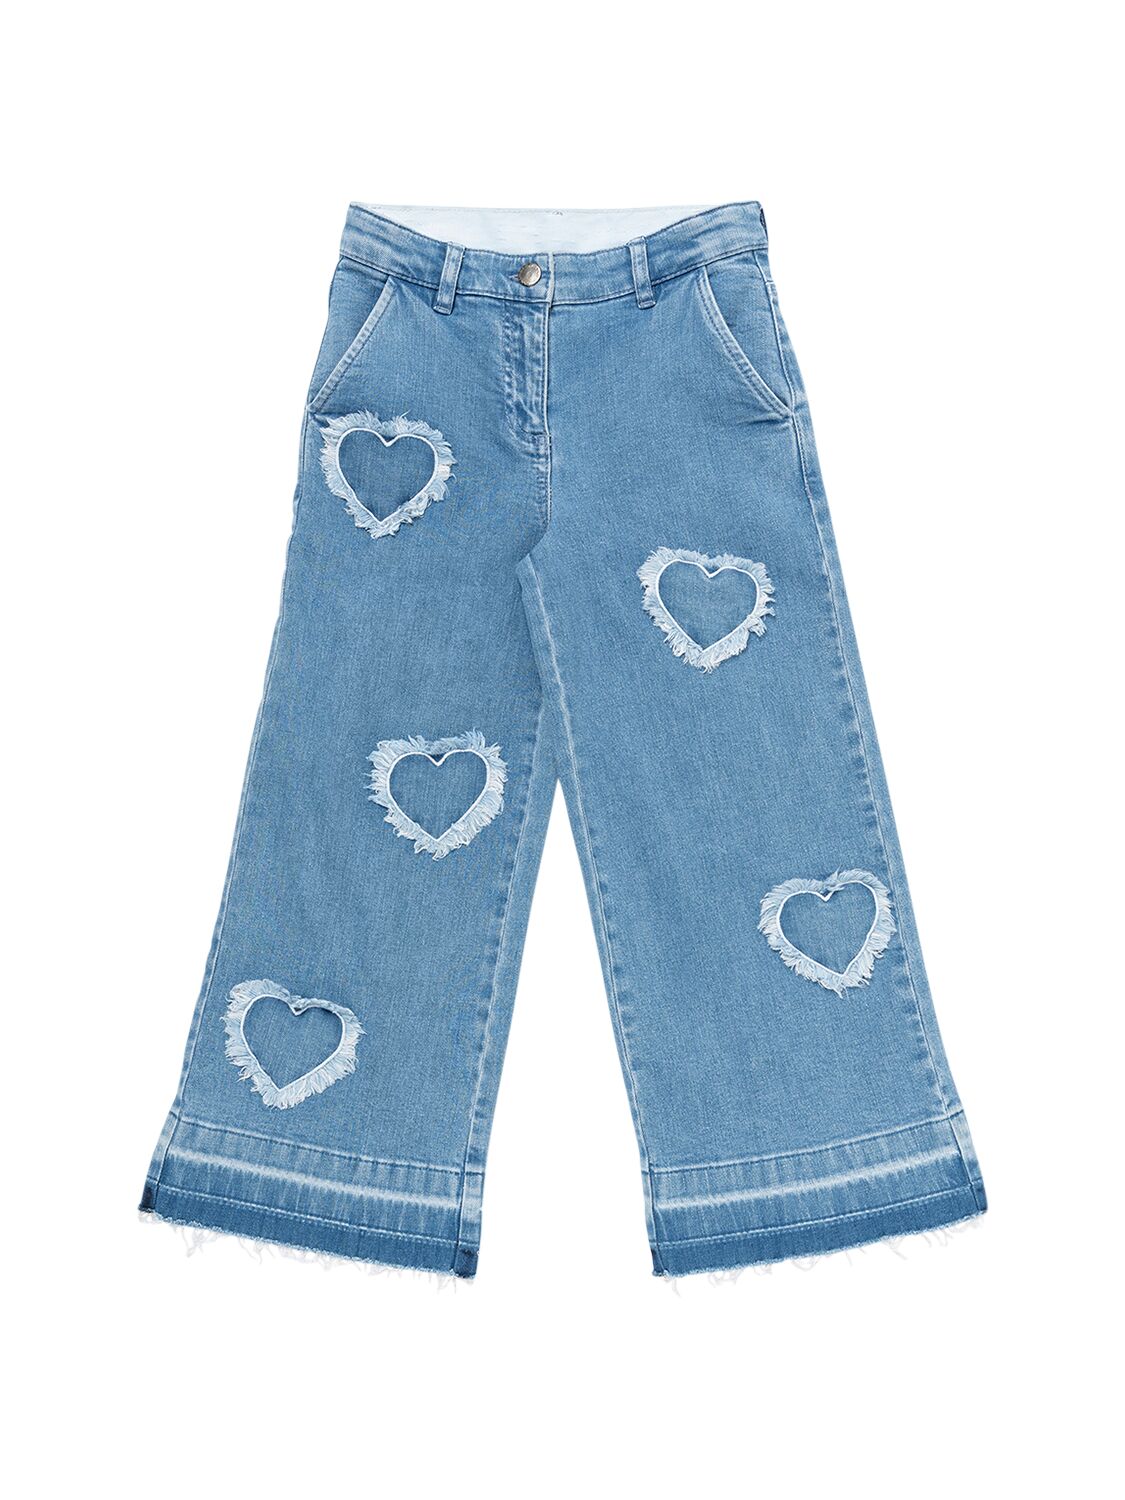 Image of Cotton Denim Jeans W/ Patches